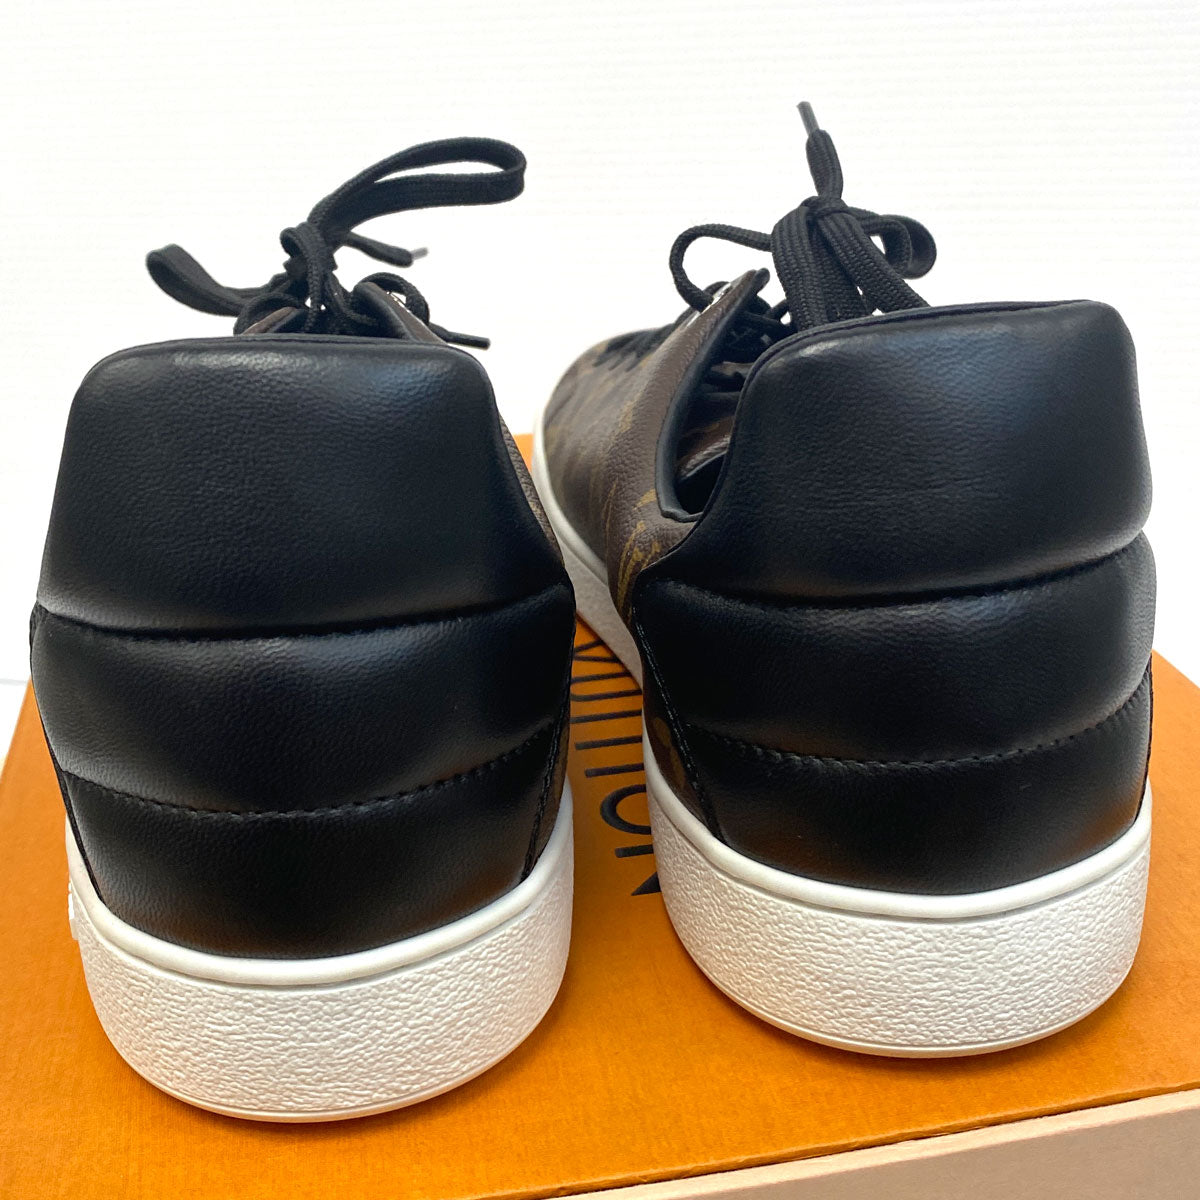 LOUIS VUITTON mens front row sneakers